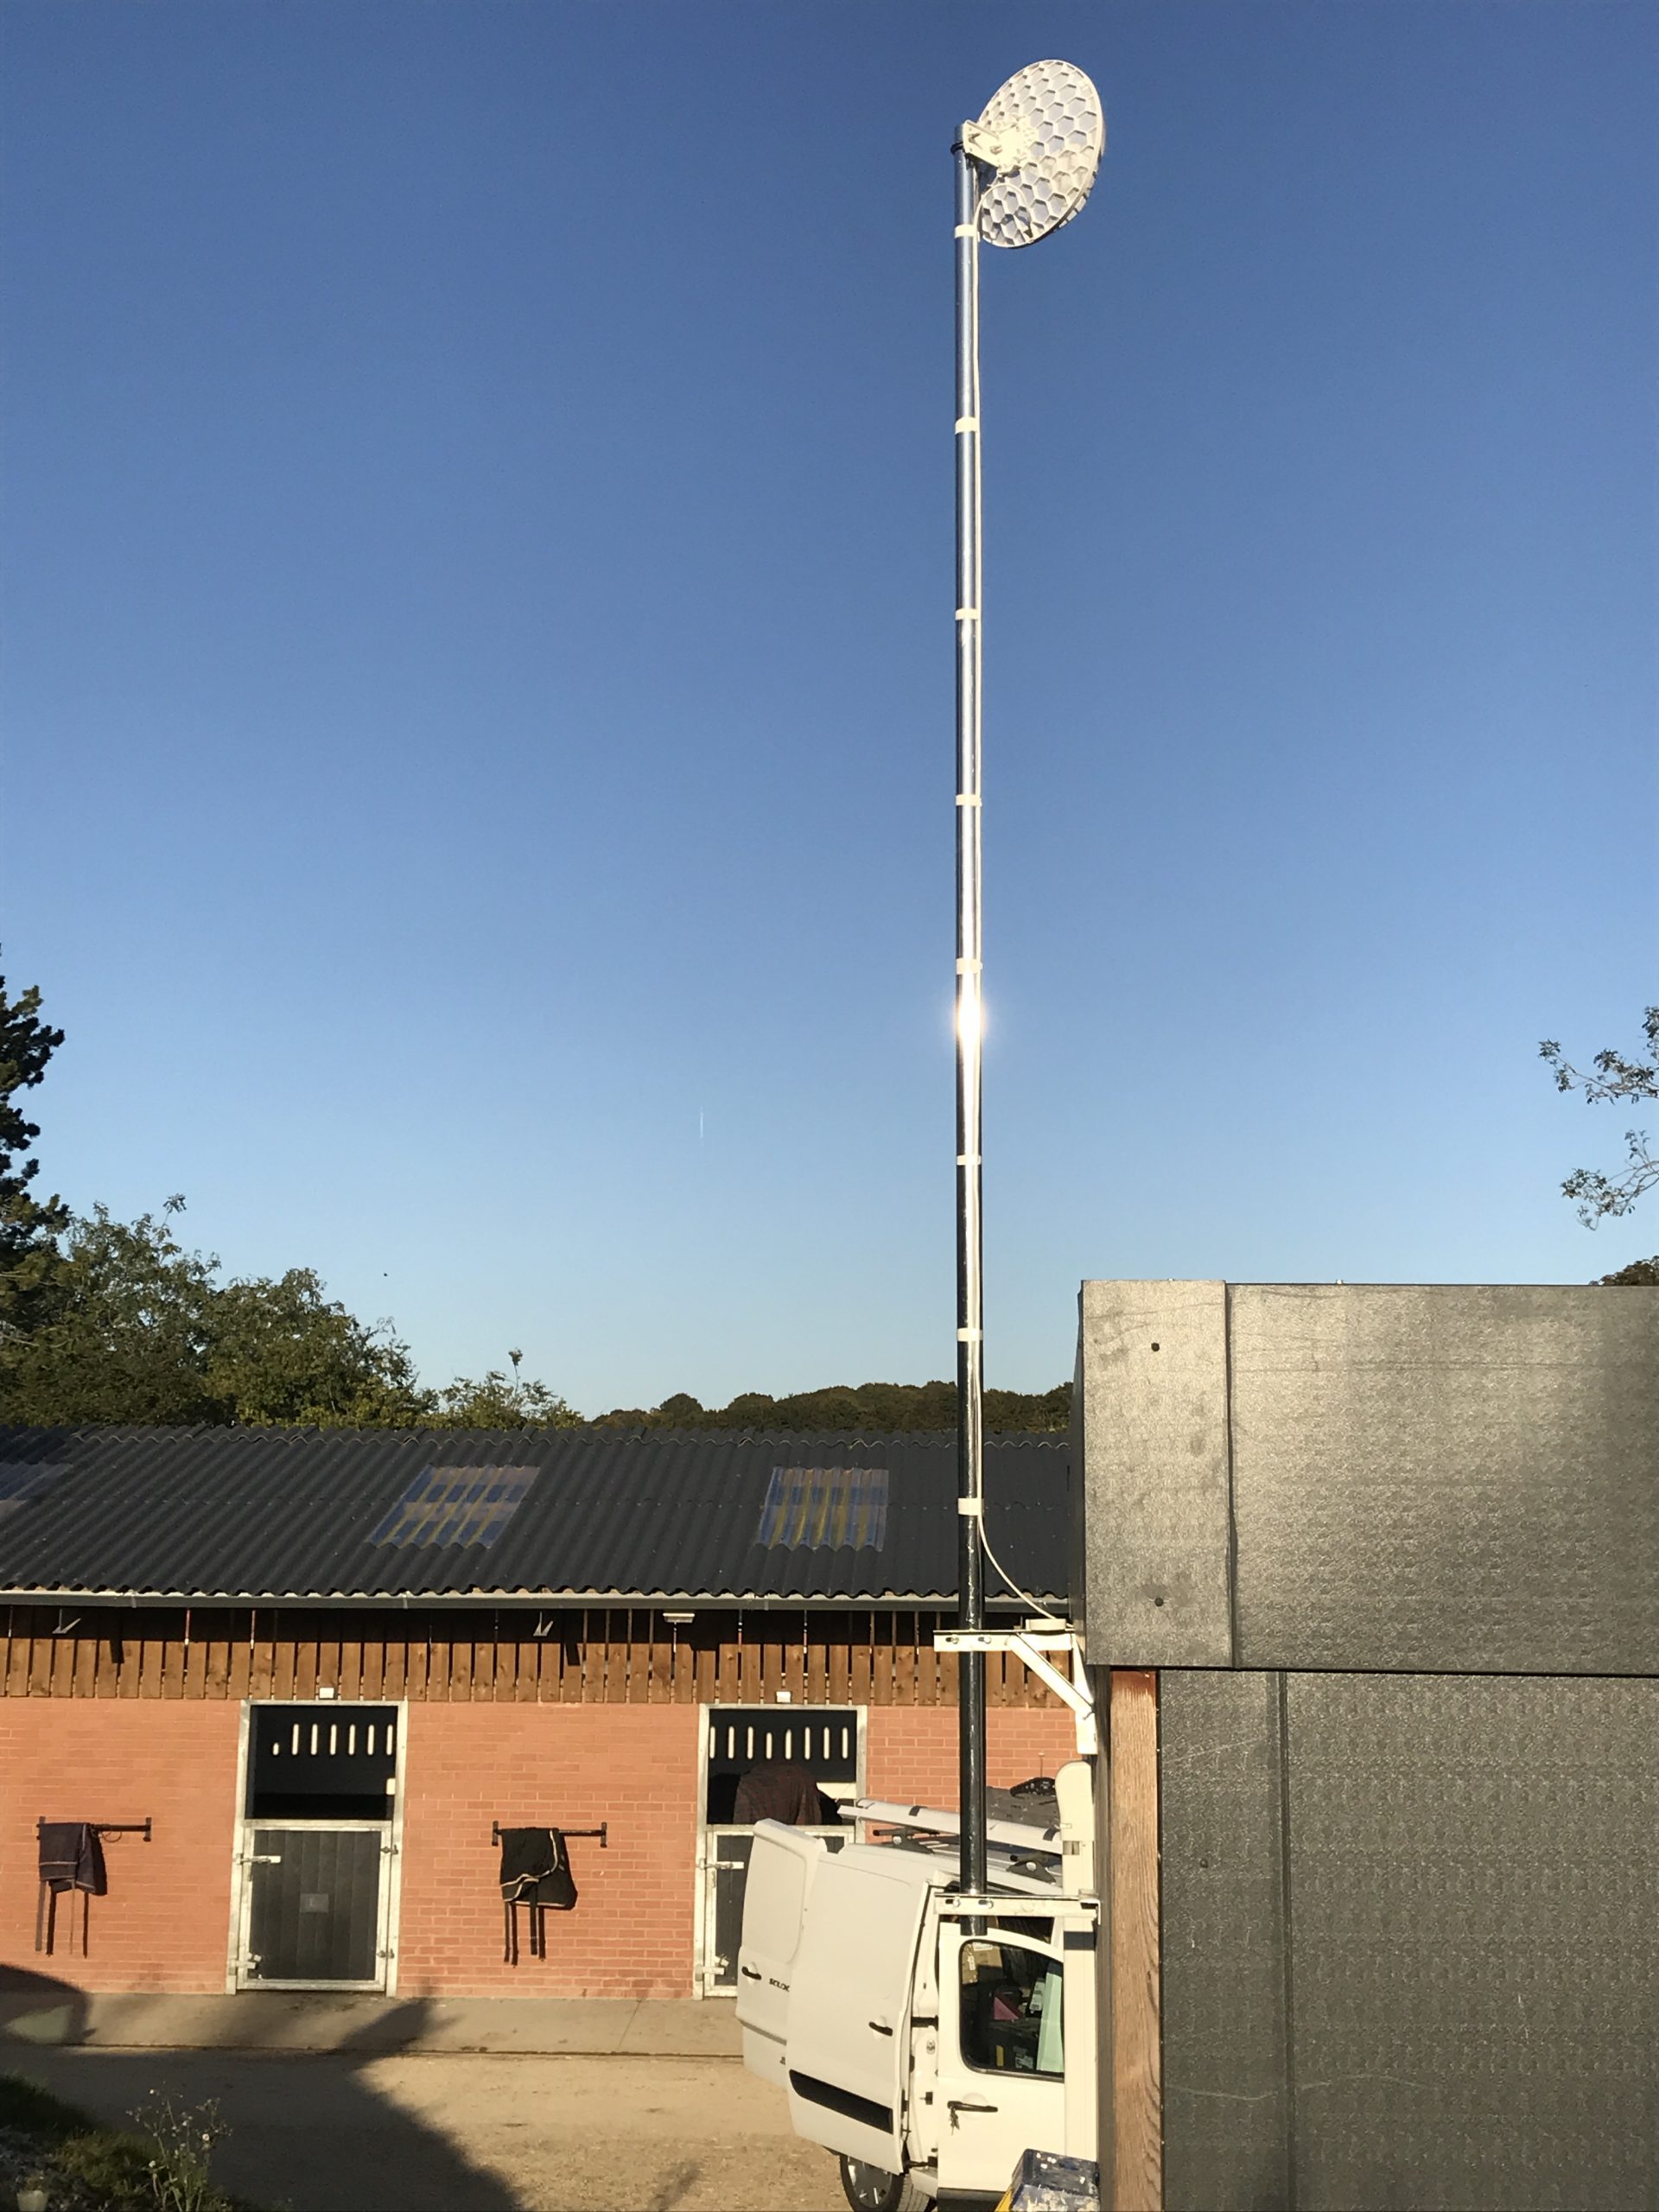 4G antenna installation in a horse yard, providing rural broadband connectivity to enhance communication and internet access in remote areas.